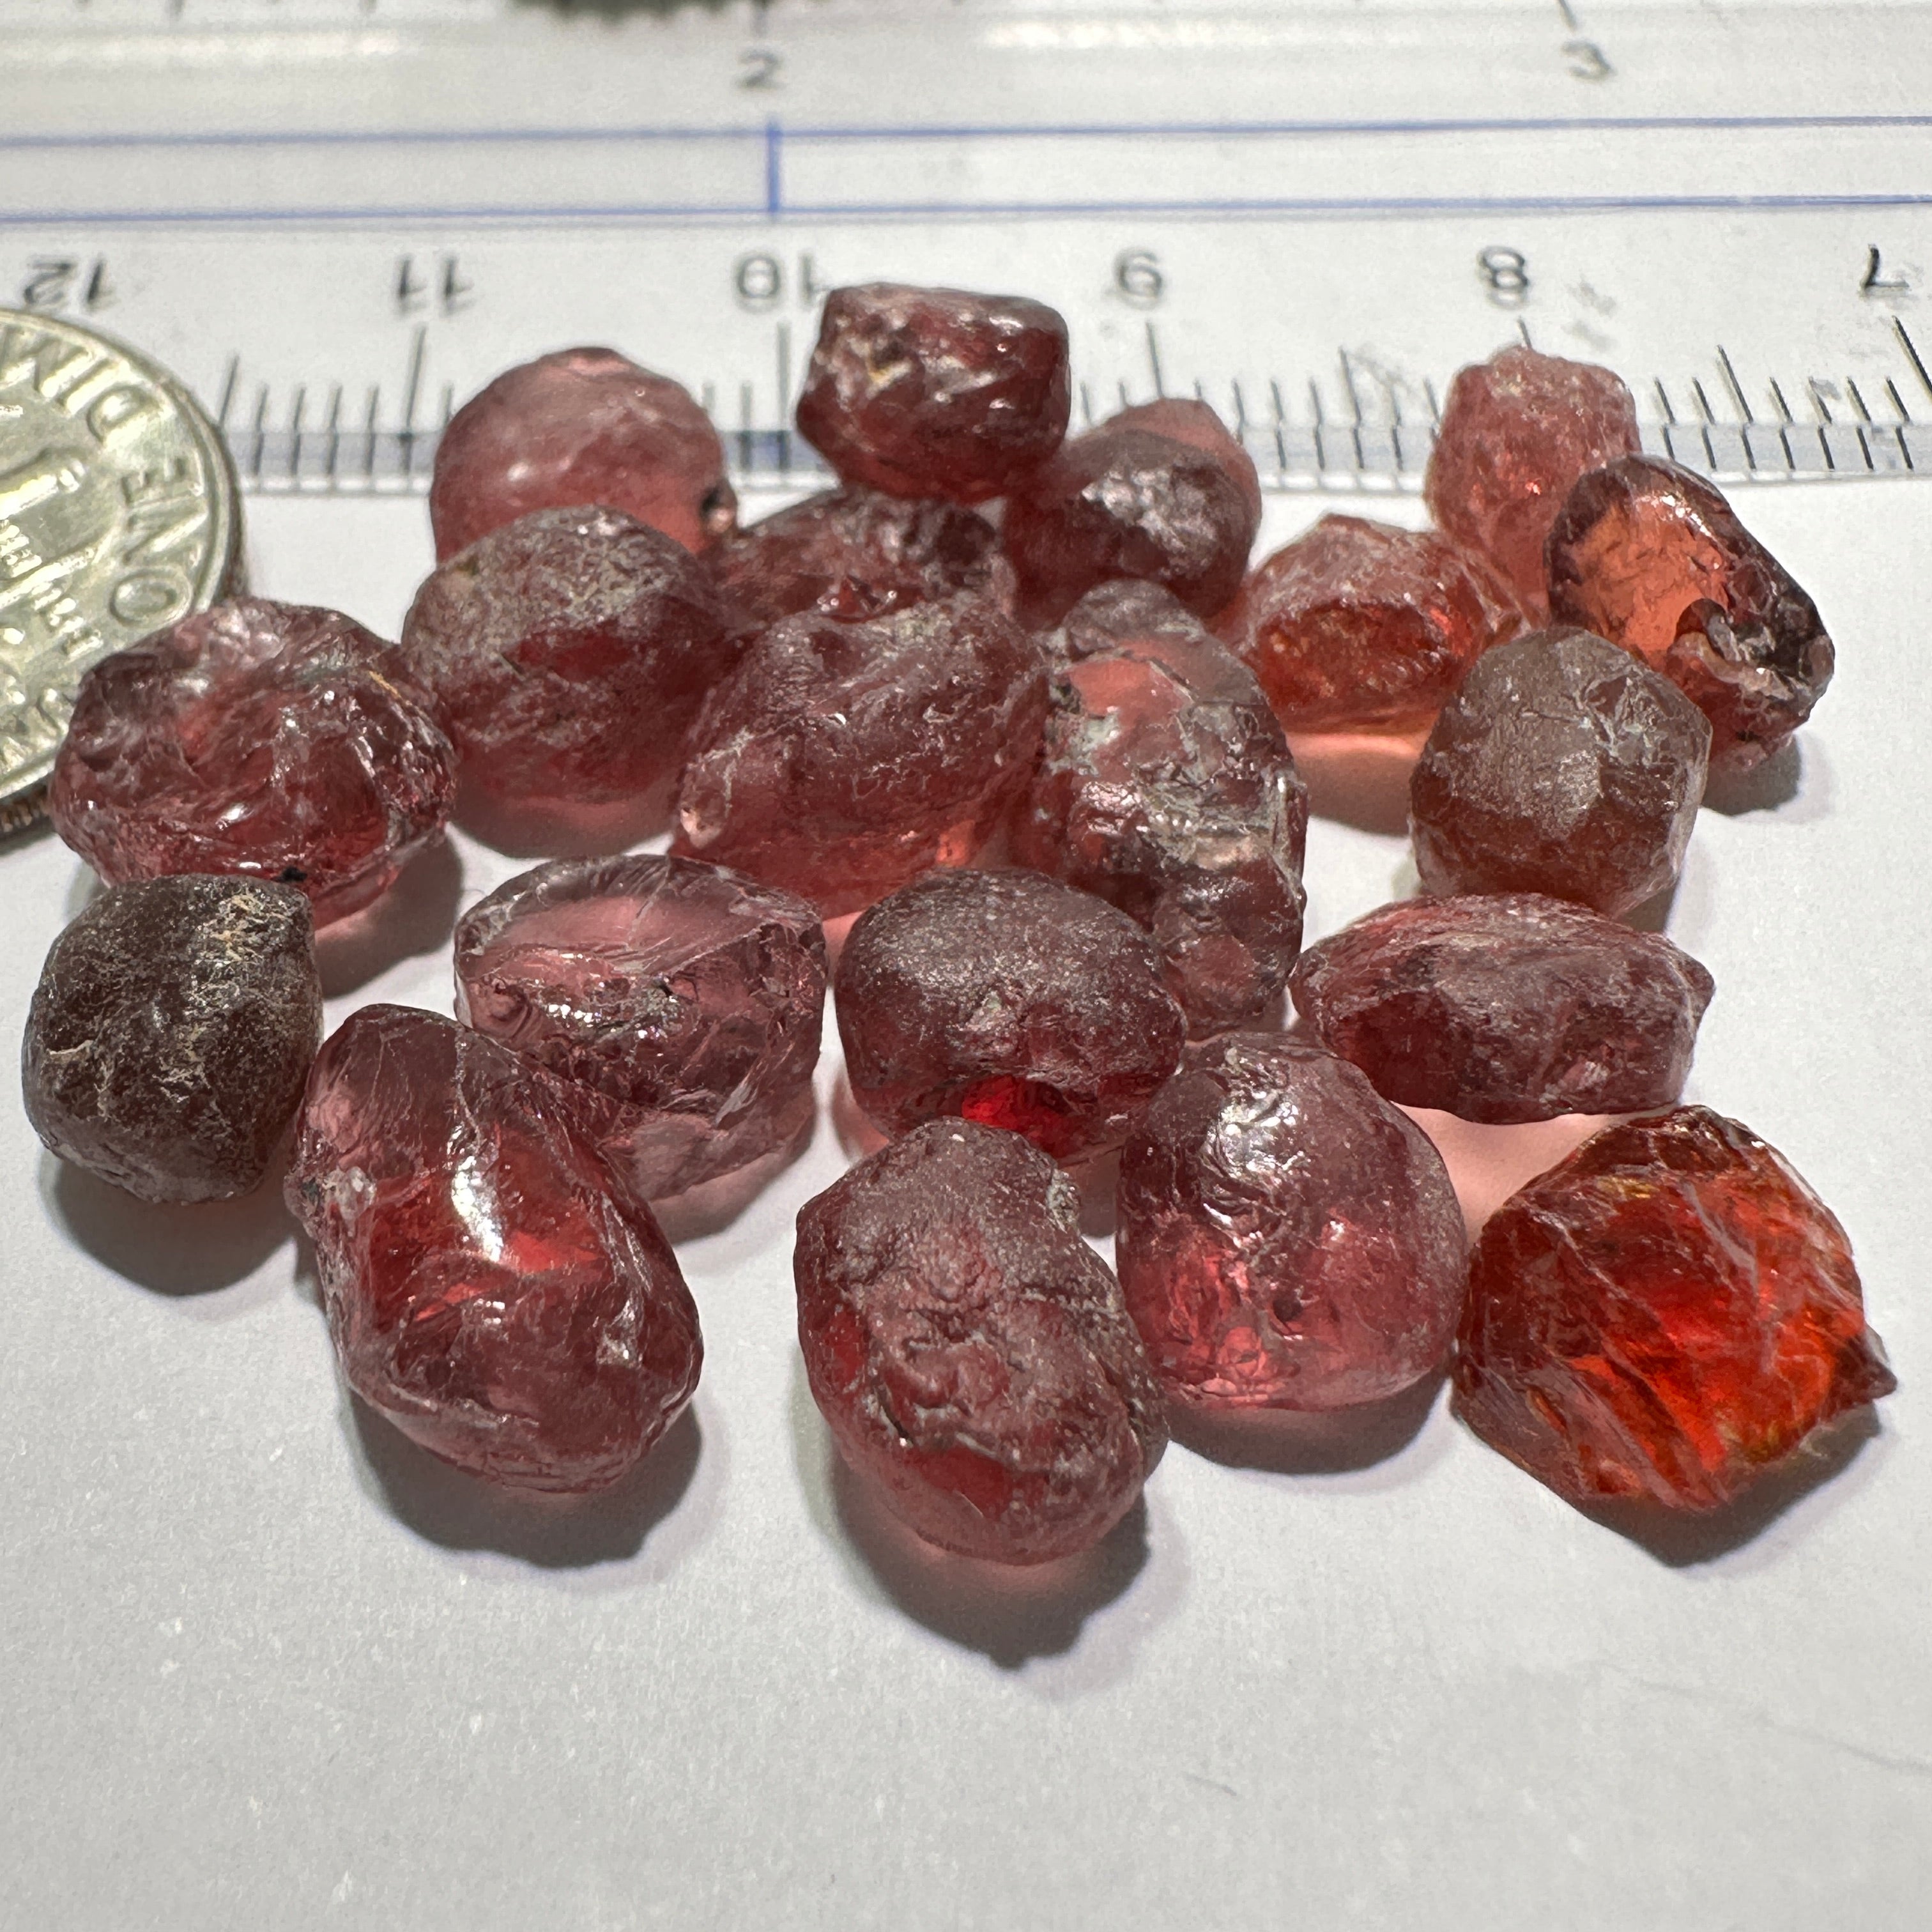 52.37ct Champagne Garnet Lot, Tanzania. 1.37ct-4.26ct. Included, Untreated Unheated